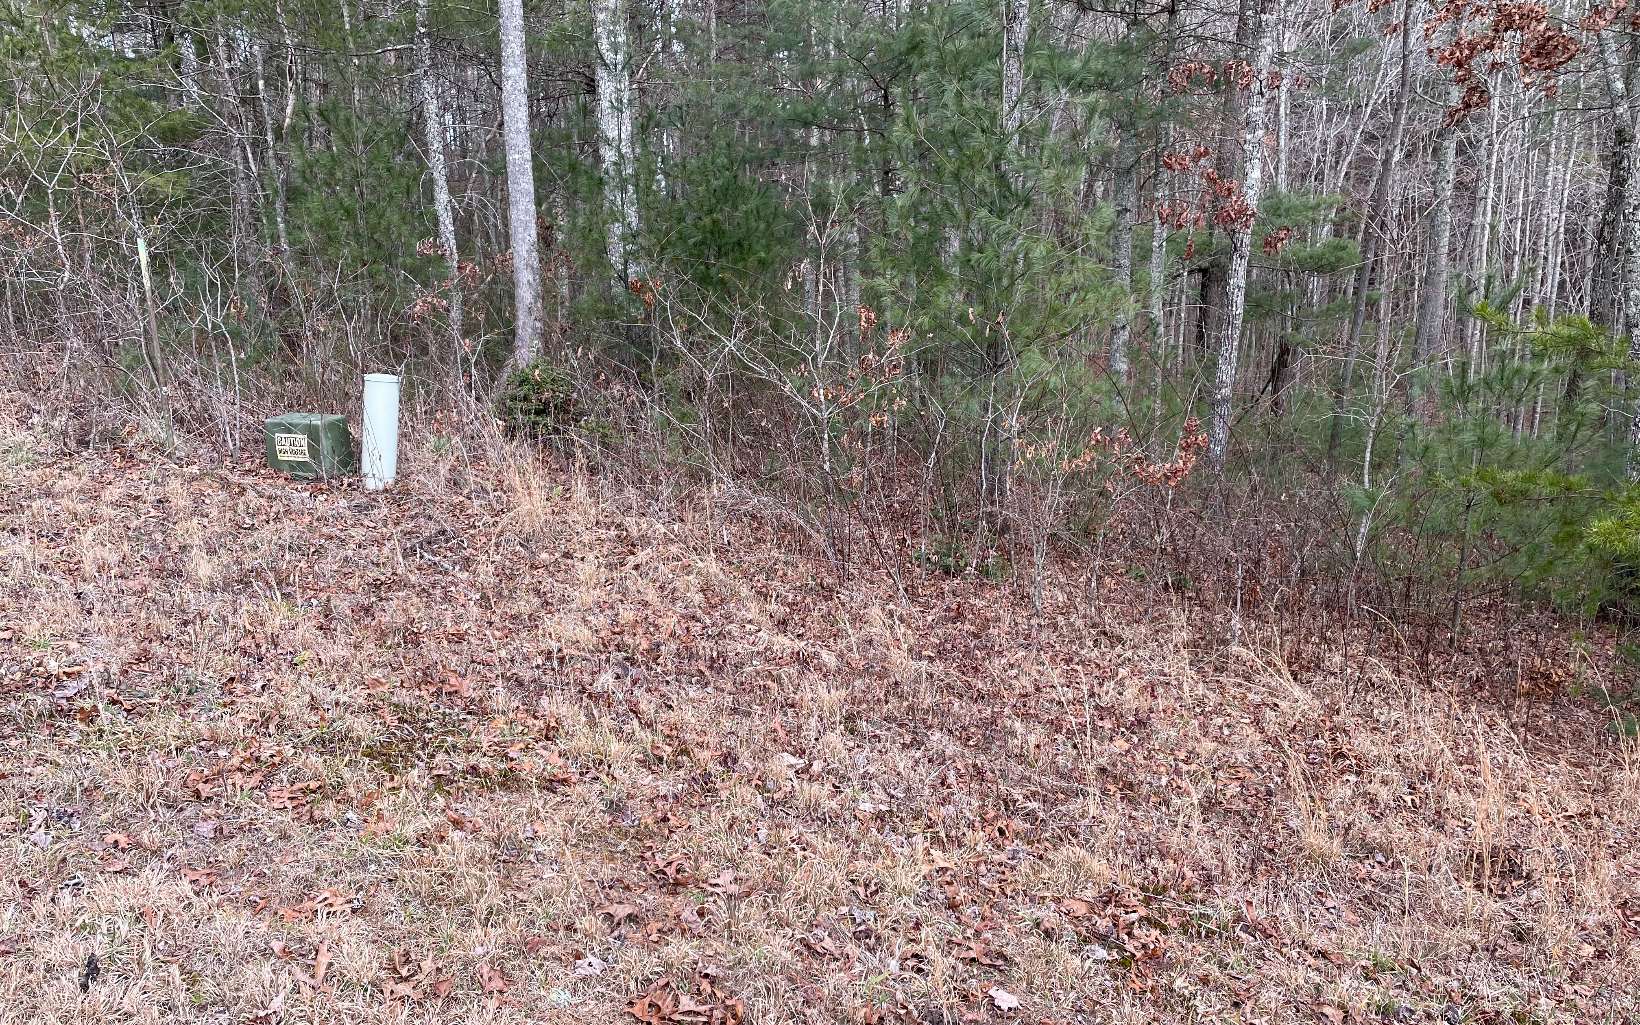 Nice level lot in a beautiful neighborhood for your home. Not far from town. Plenty of activities to enjoy here in Blairsville, hiking, boating, parks and recreation...come check it out. Level 3 soil report available.